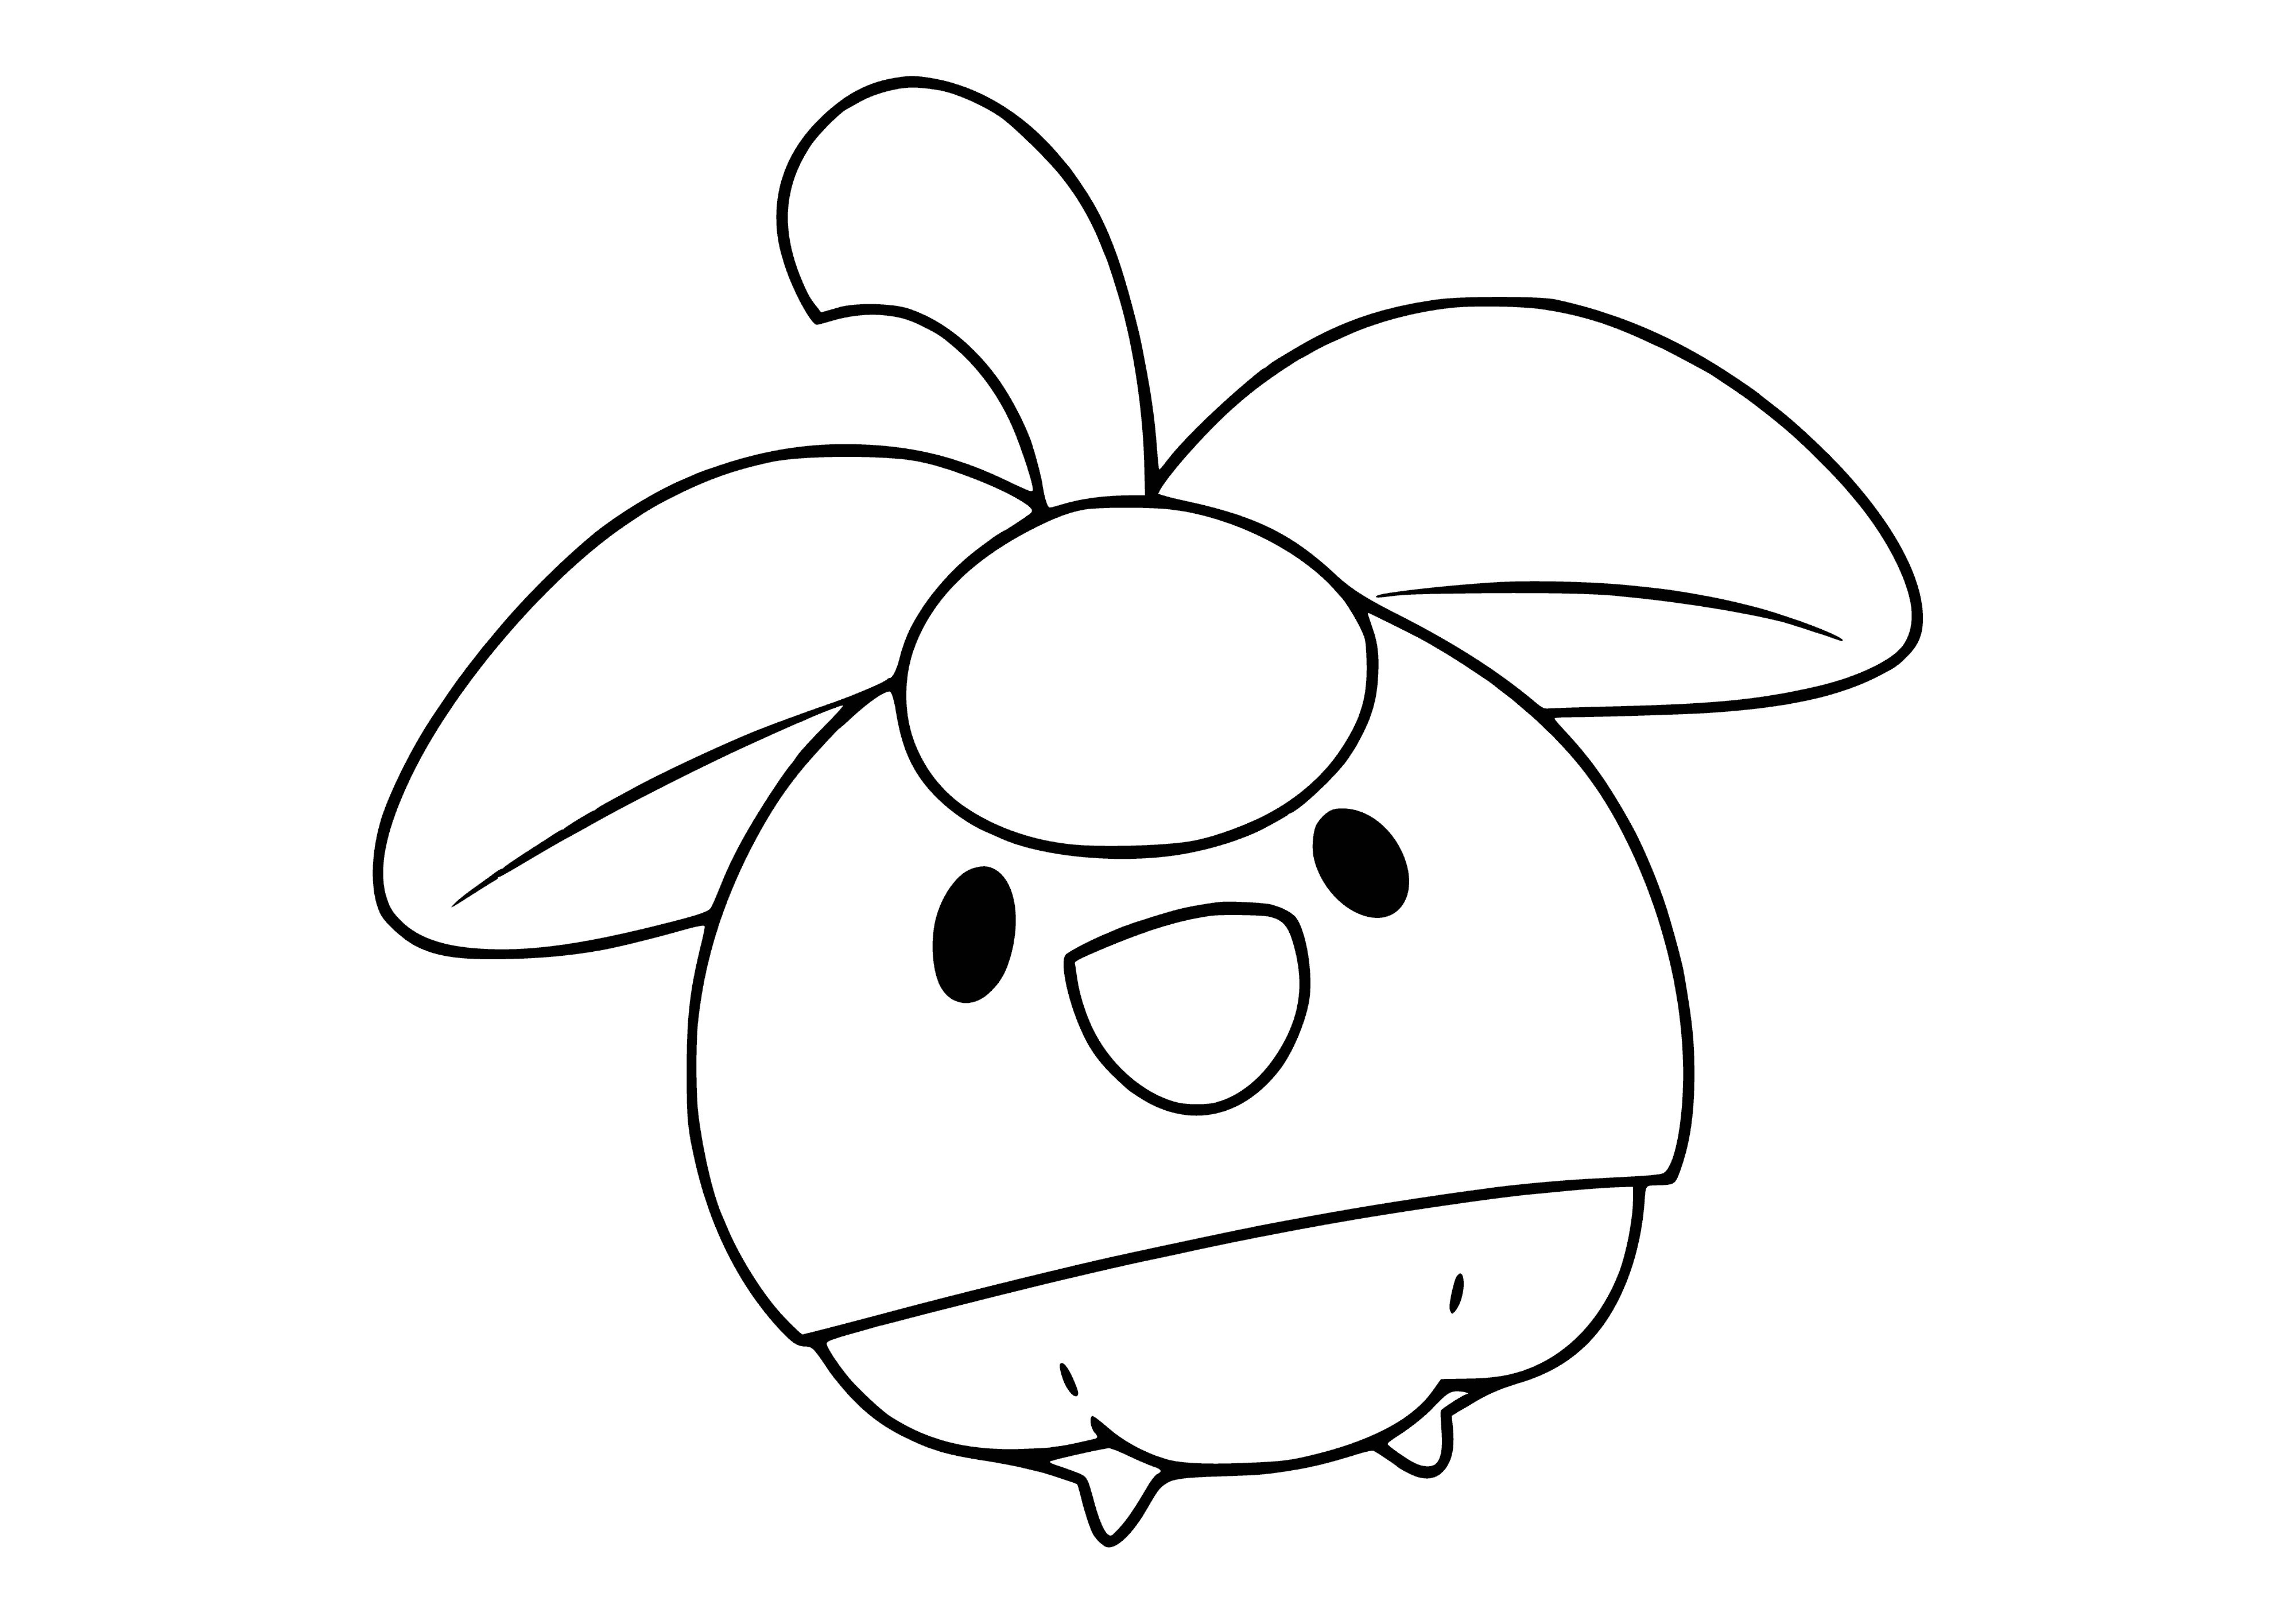 coloring page: Small, round creature w/ tough exterior; deep purple body, small head/mouth, two leaves on back/front, tail long+thin, small, round feet.